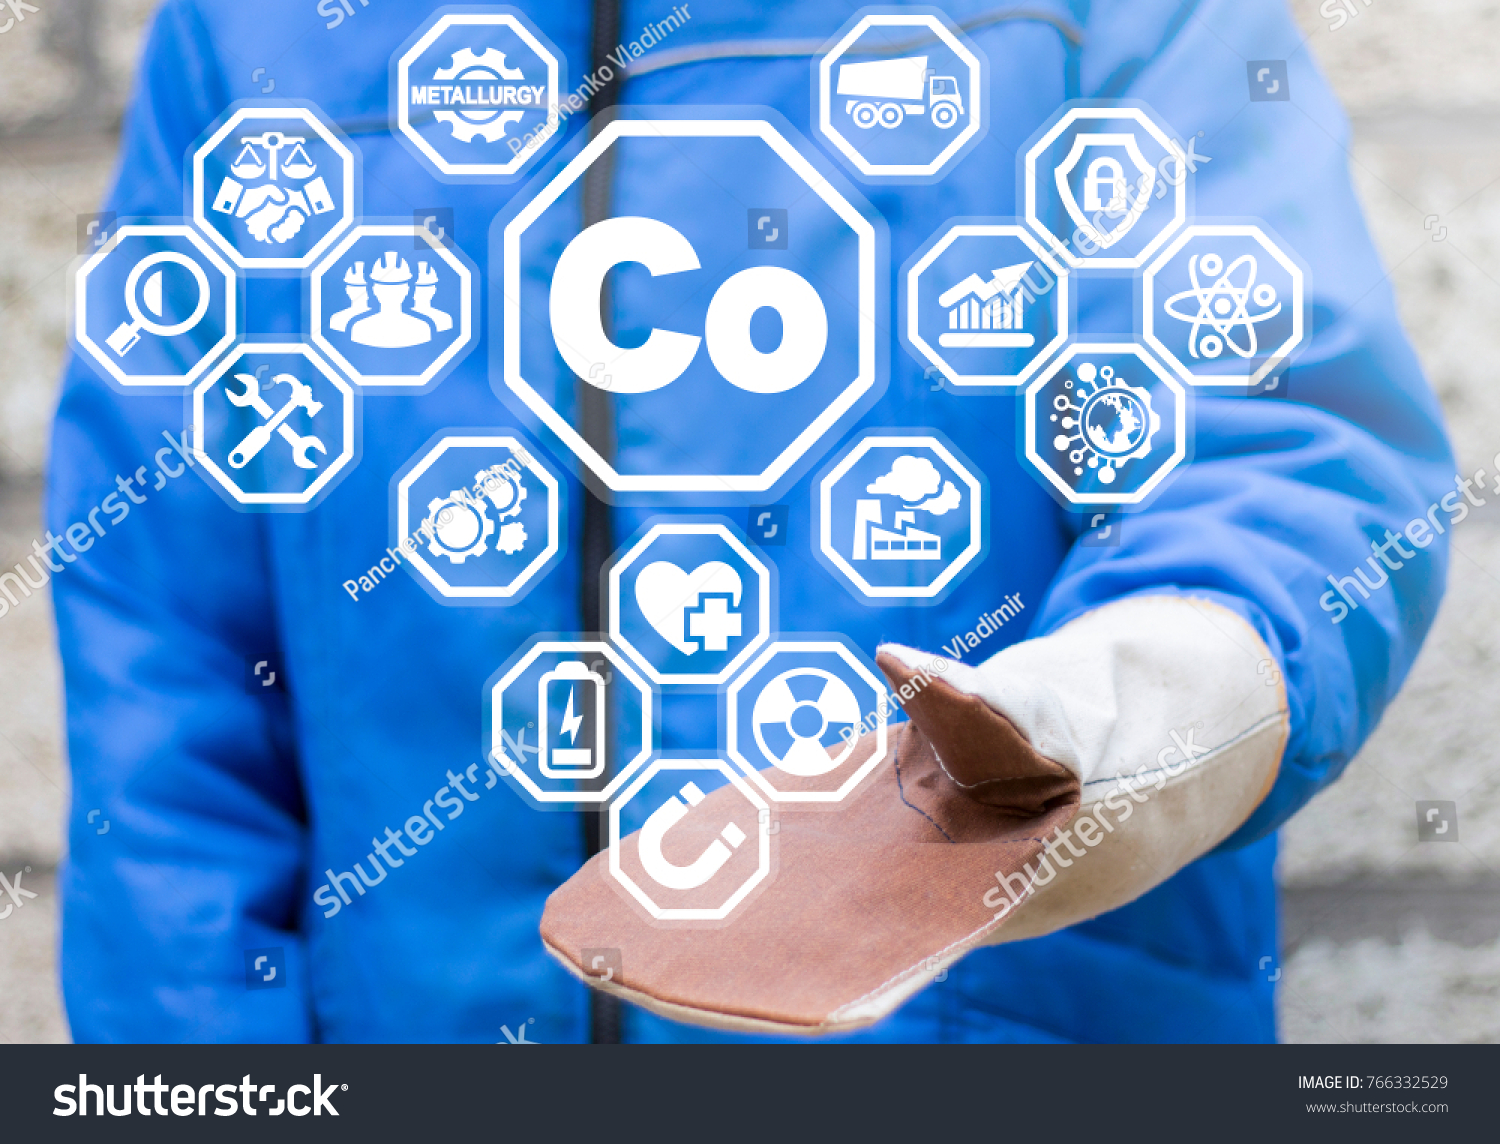 Cobalt. Metallurgy. Manufacture, Mining, Production, Extraction High-temperature Strength Metal. The use of cobalt in medicine, the manufacture of lithium batteries, magnets, drills. Co Metal. #766332529